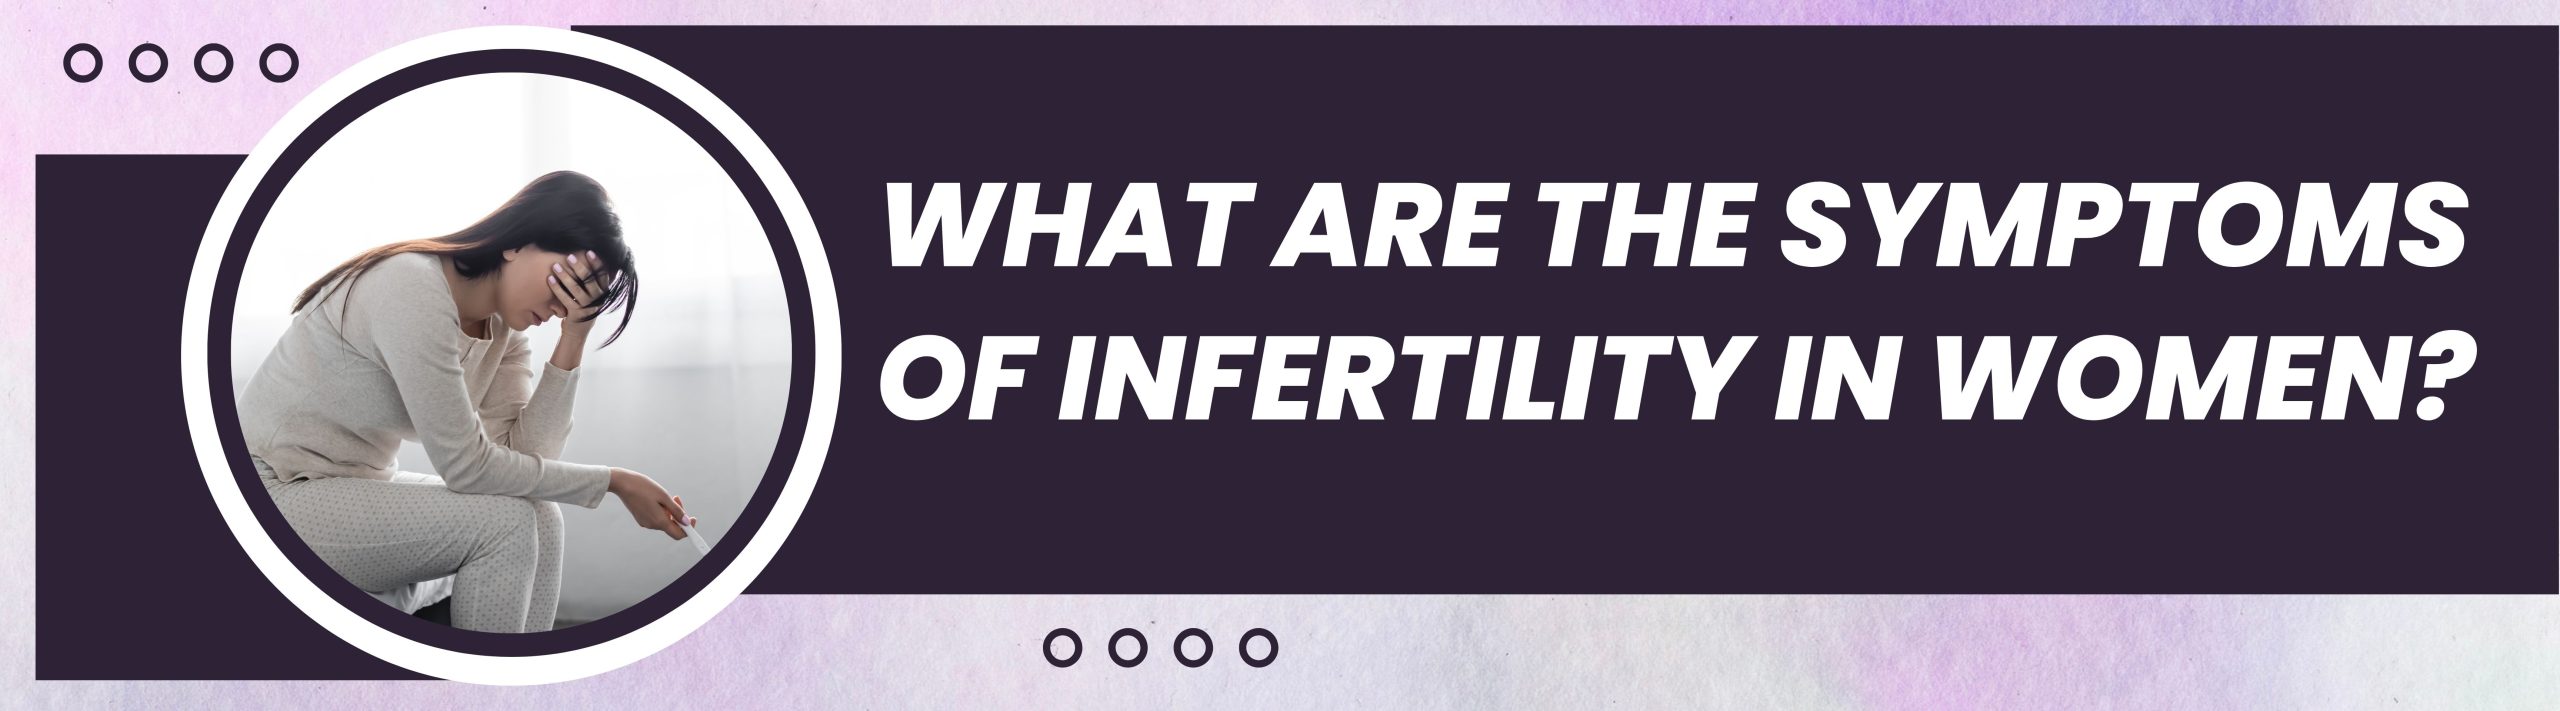 What Are The Symptoms Of Infertility In Women